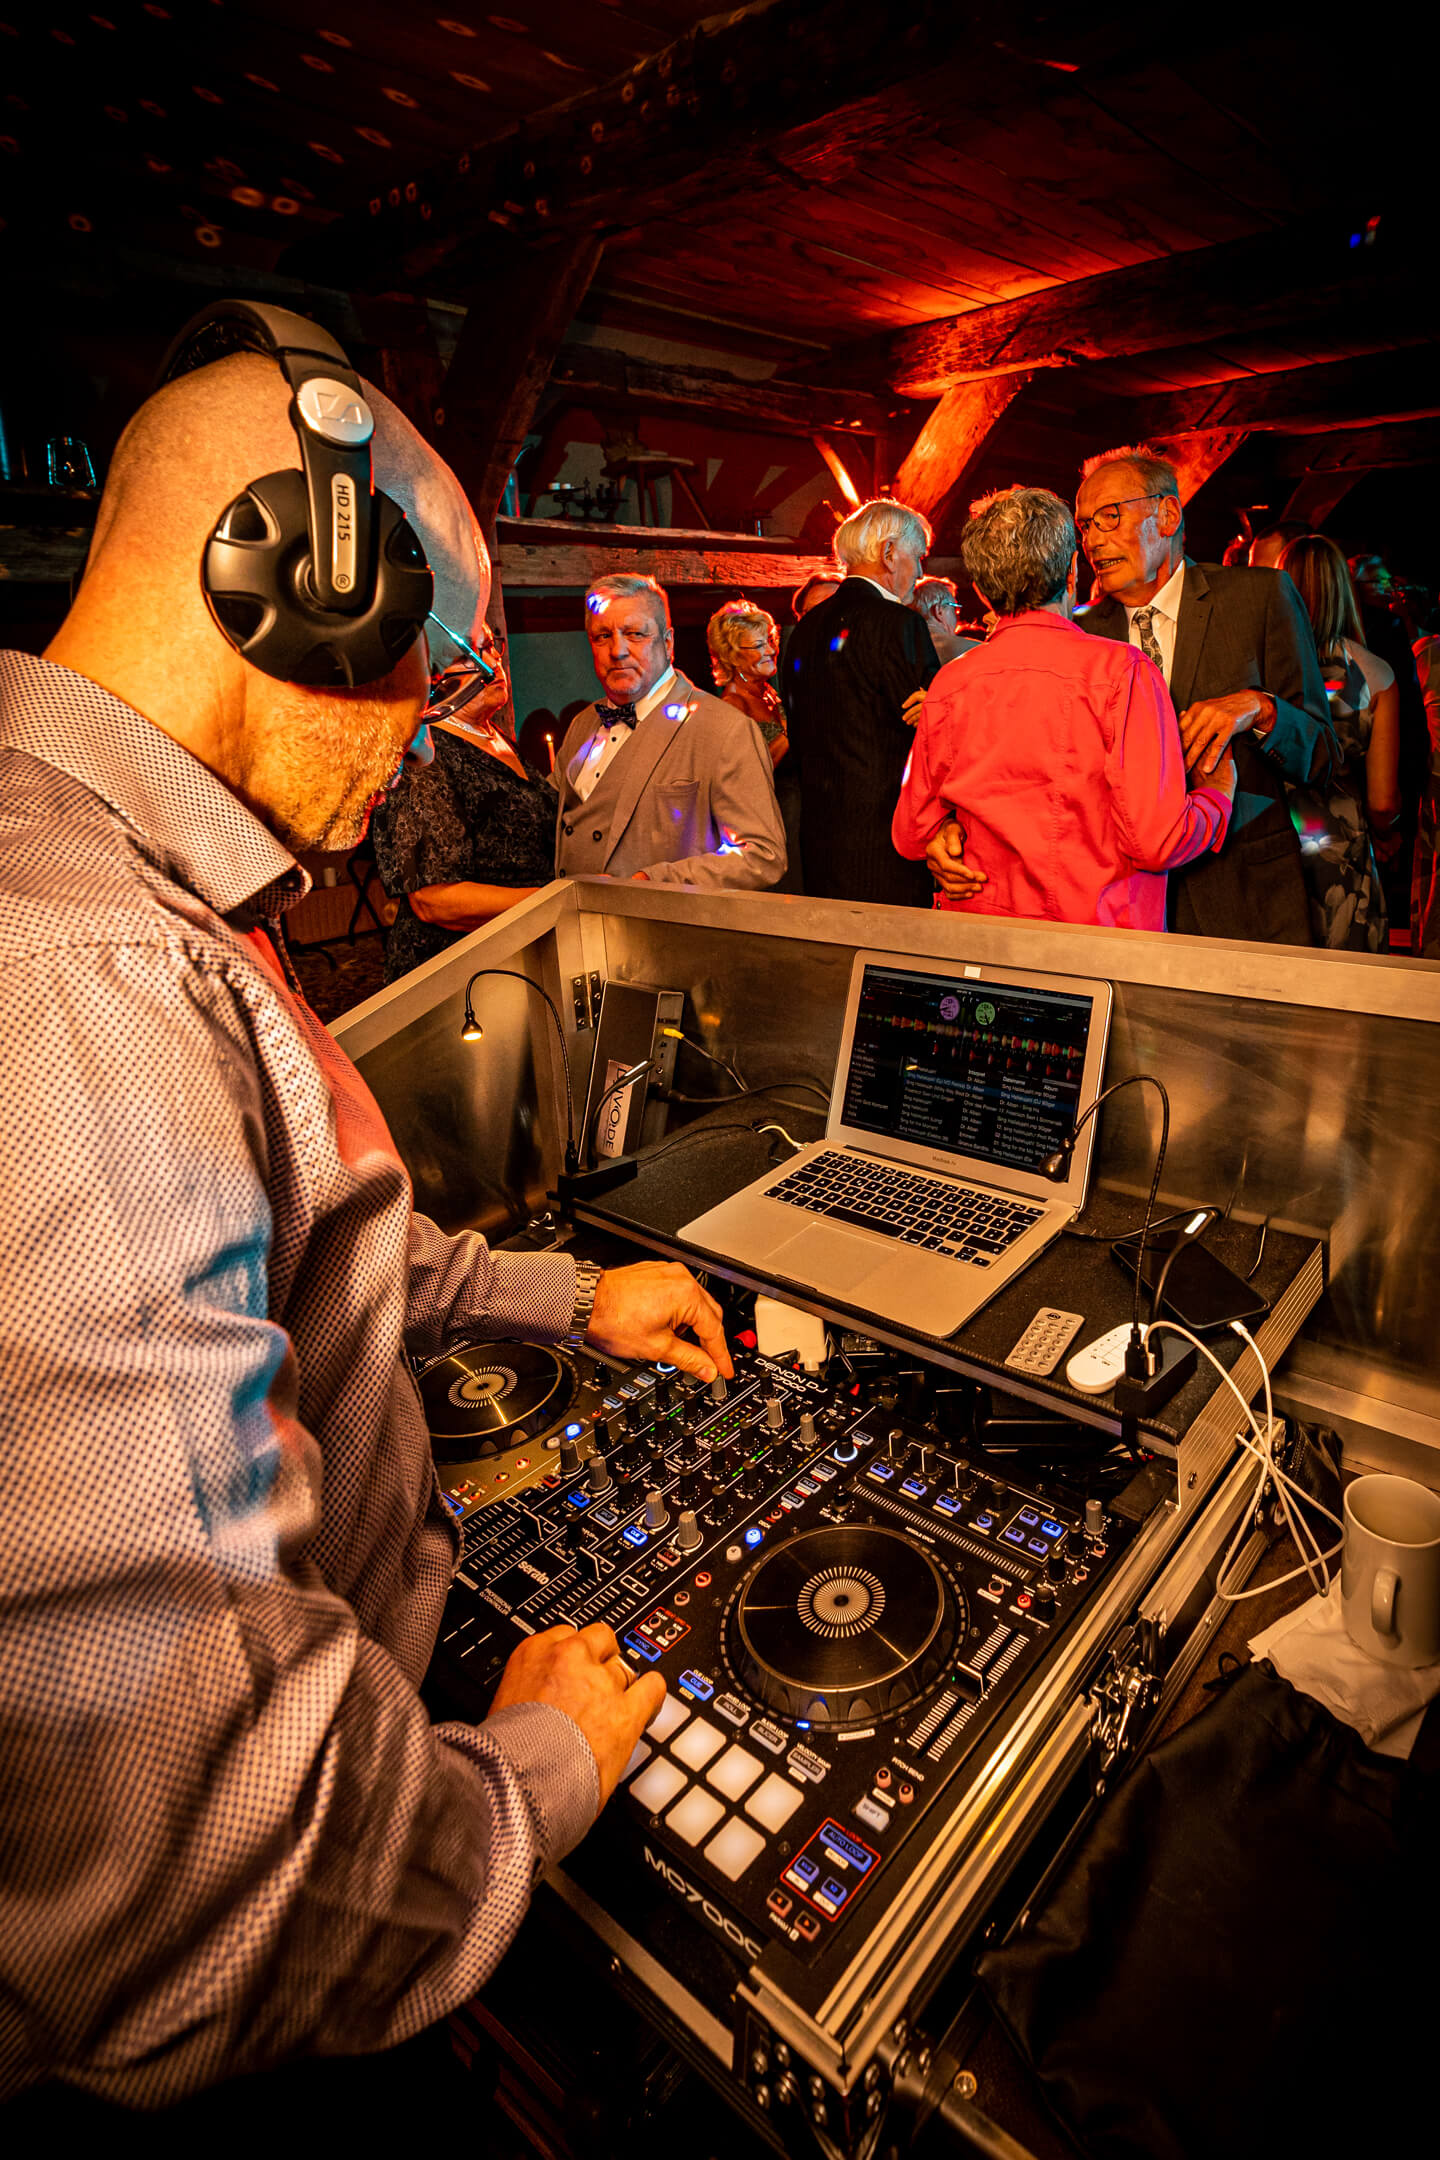 DJ in Action.